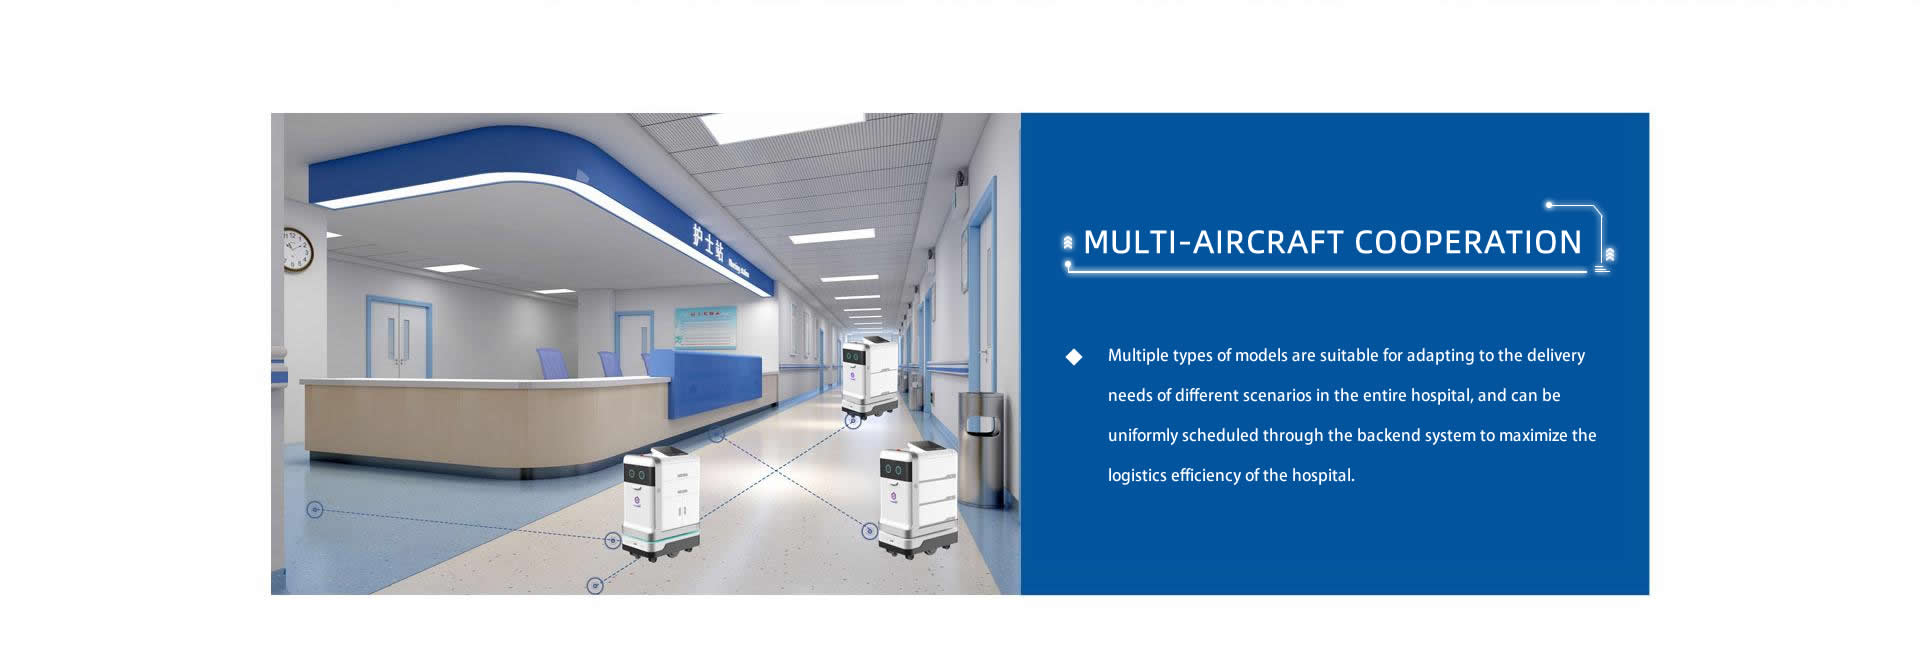 MULTI-AIRCRAFT COOPERATION: Multiple types of models are suitable for adapting to the delivery needs of different scenarios in the entire hospital, and can be uniformly scheduled through the backend system to maximize the logistics efficiency of the hospital.